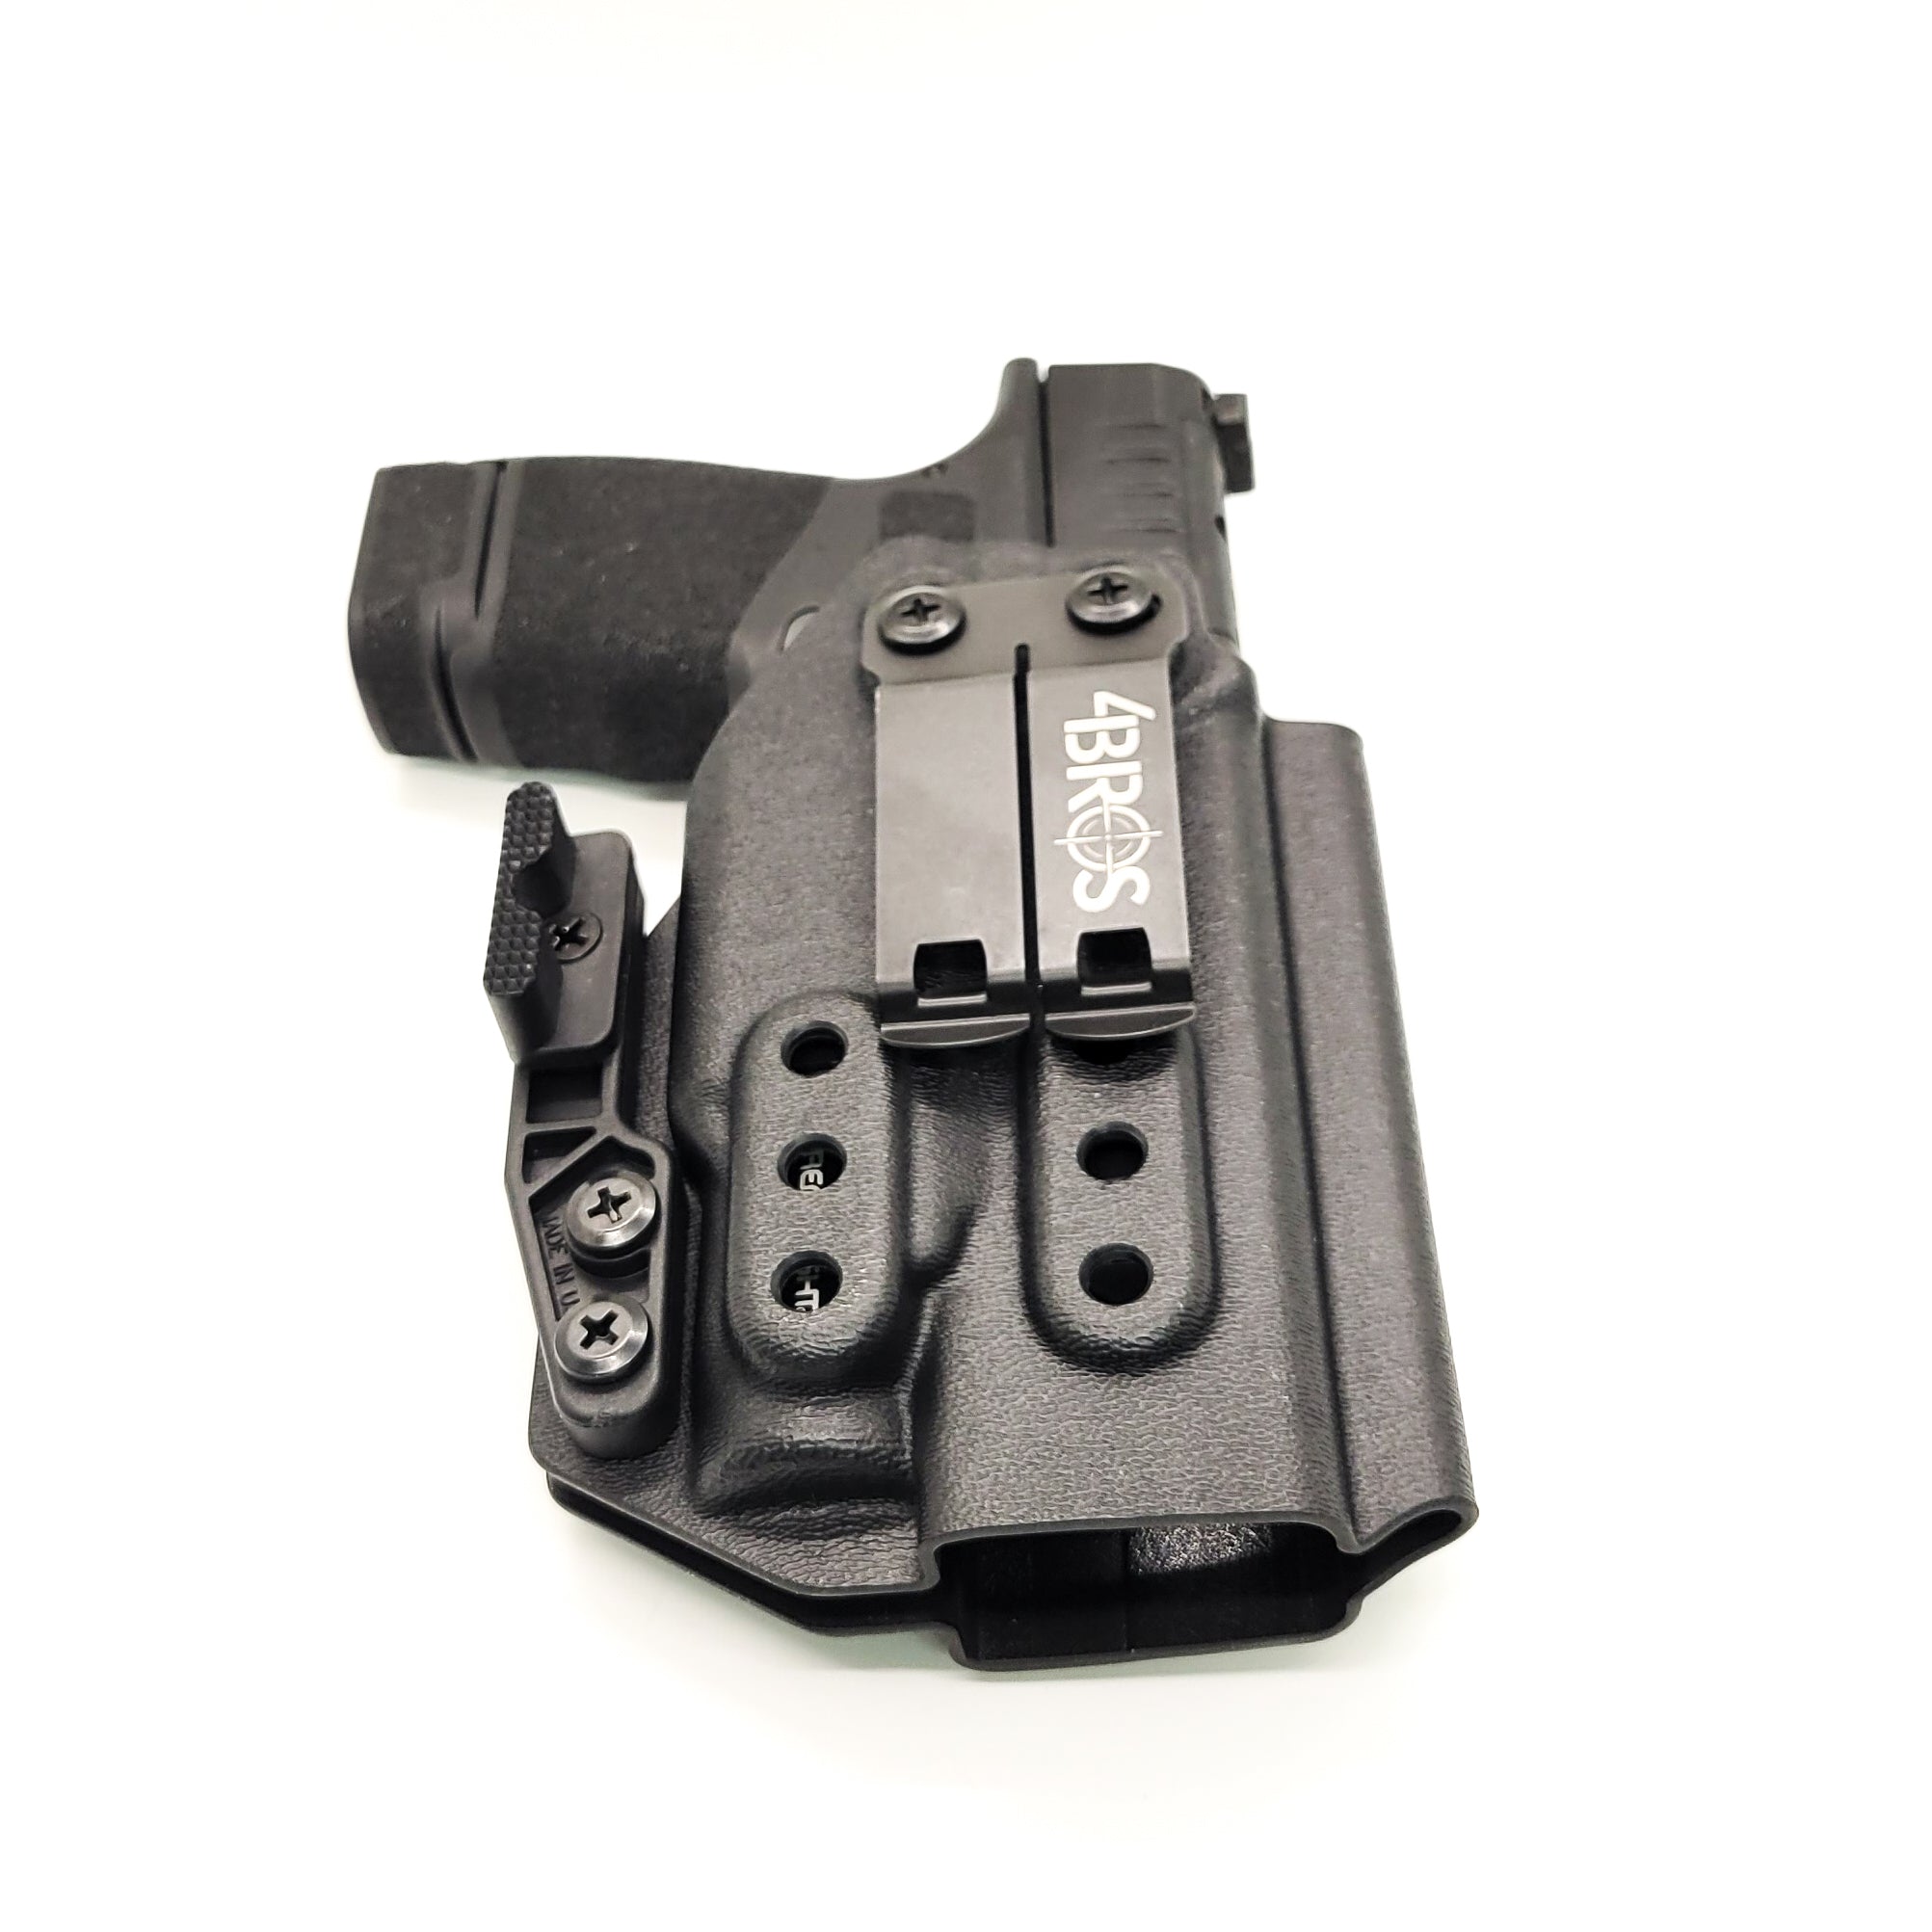 Inside Waistband Holster designed to fit the Springfield Hellcat pistol with the Streamlight TLR-7 Sub light mounted to the handgun. The holster retention is on the light itself and not the pistol. Full sweat guard, adjustable retention, minimal material, and smooth edges to reduce printing. Made in the USA.